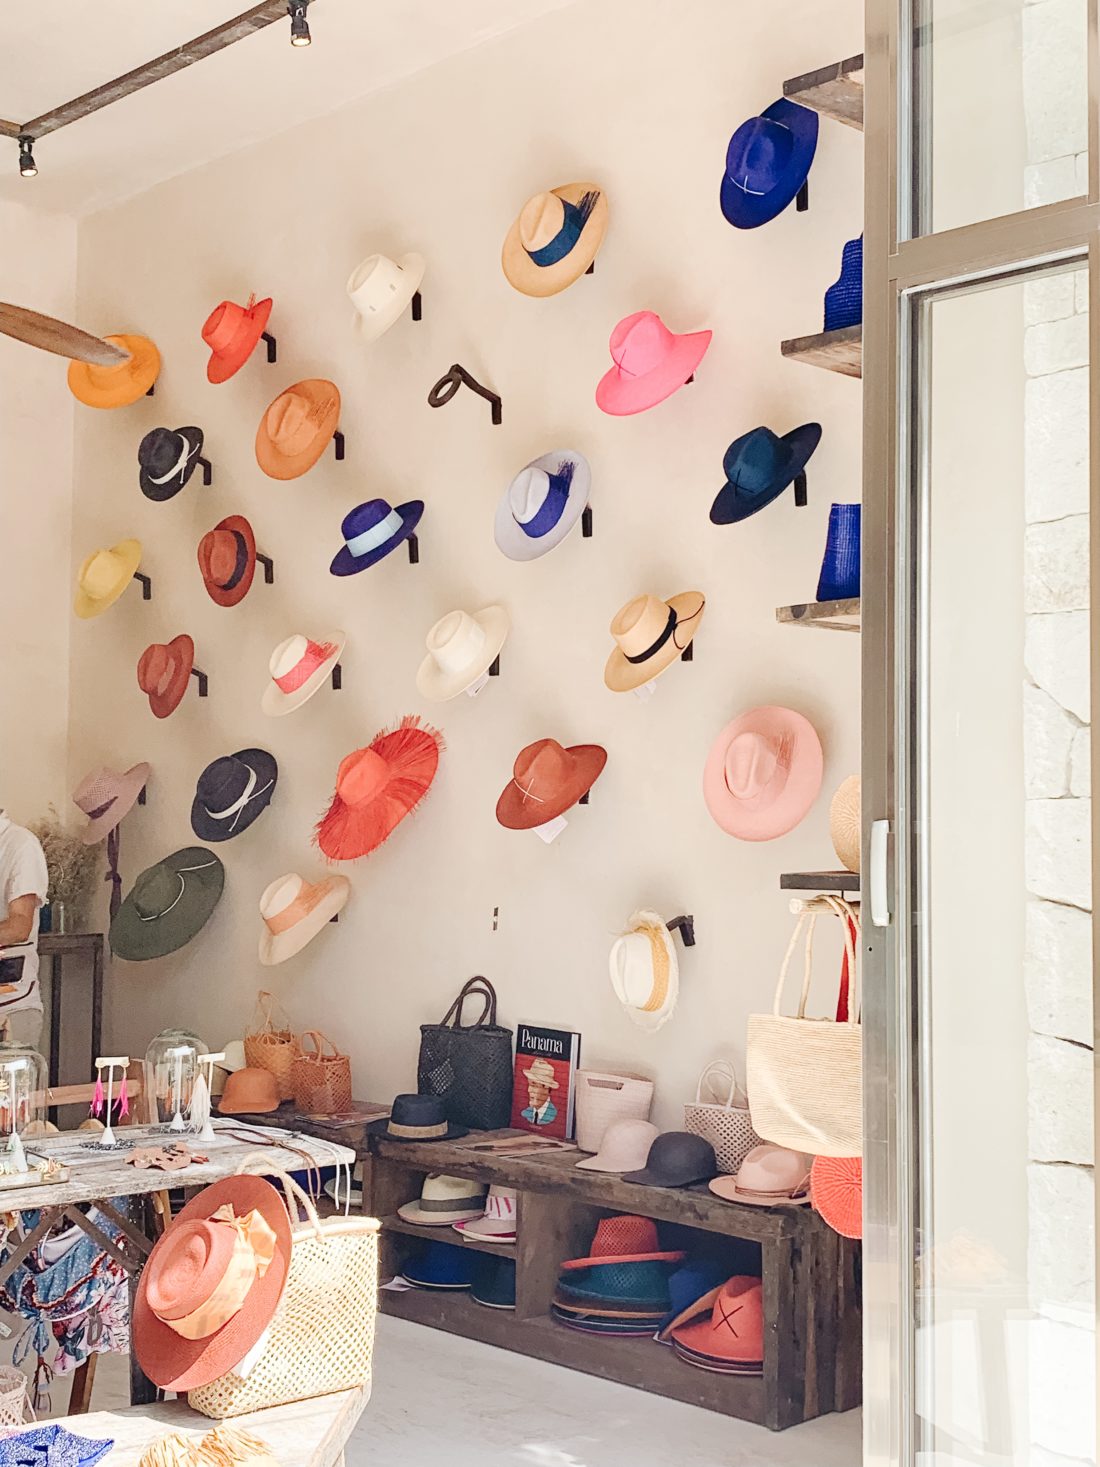 A Tulum boutique filled with colorful hats